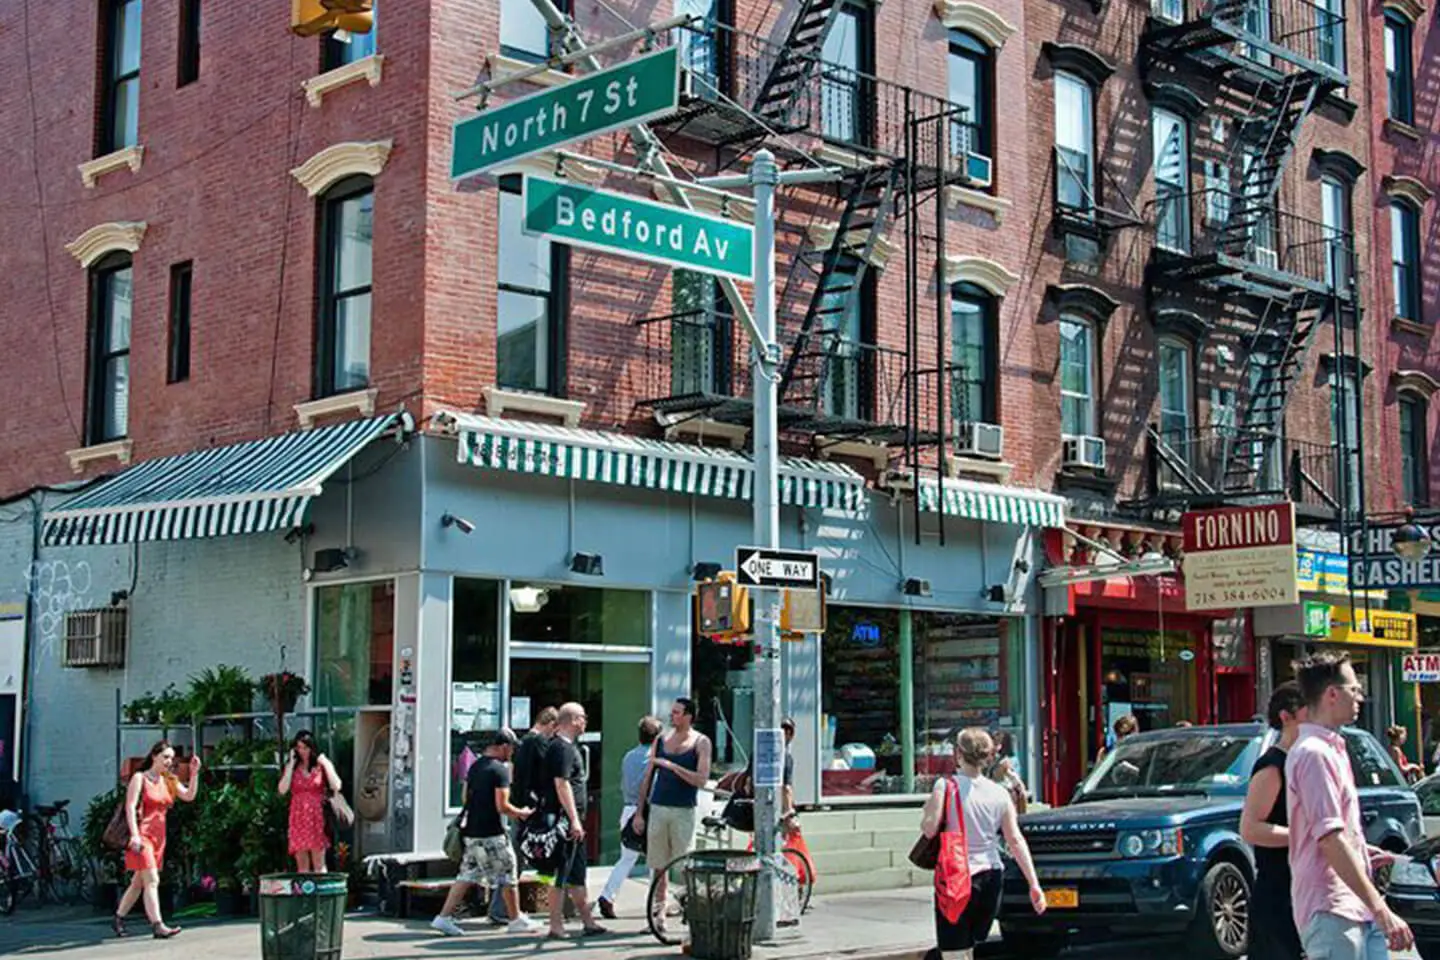 Street corner in an urban neighborhood in Manhattan with pedestrians, brick buildings, and a street sign for north 7 st and bedford ave.